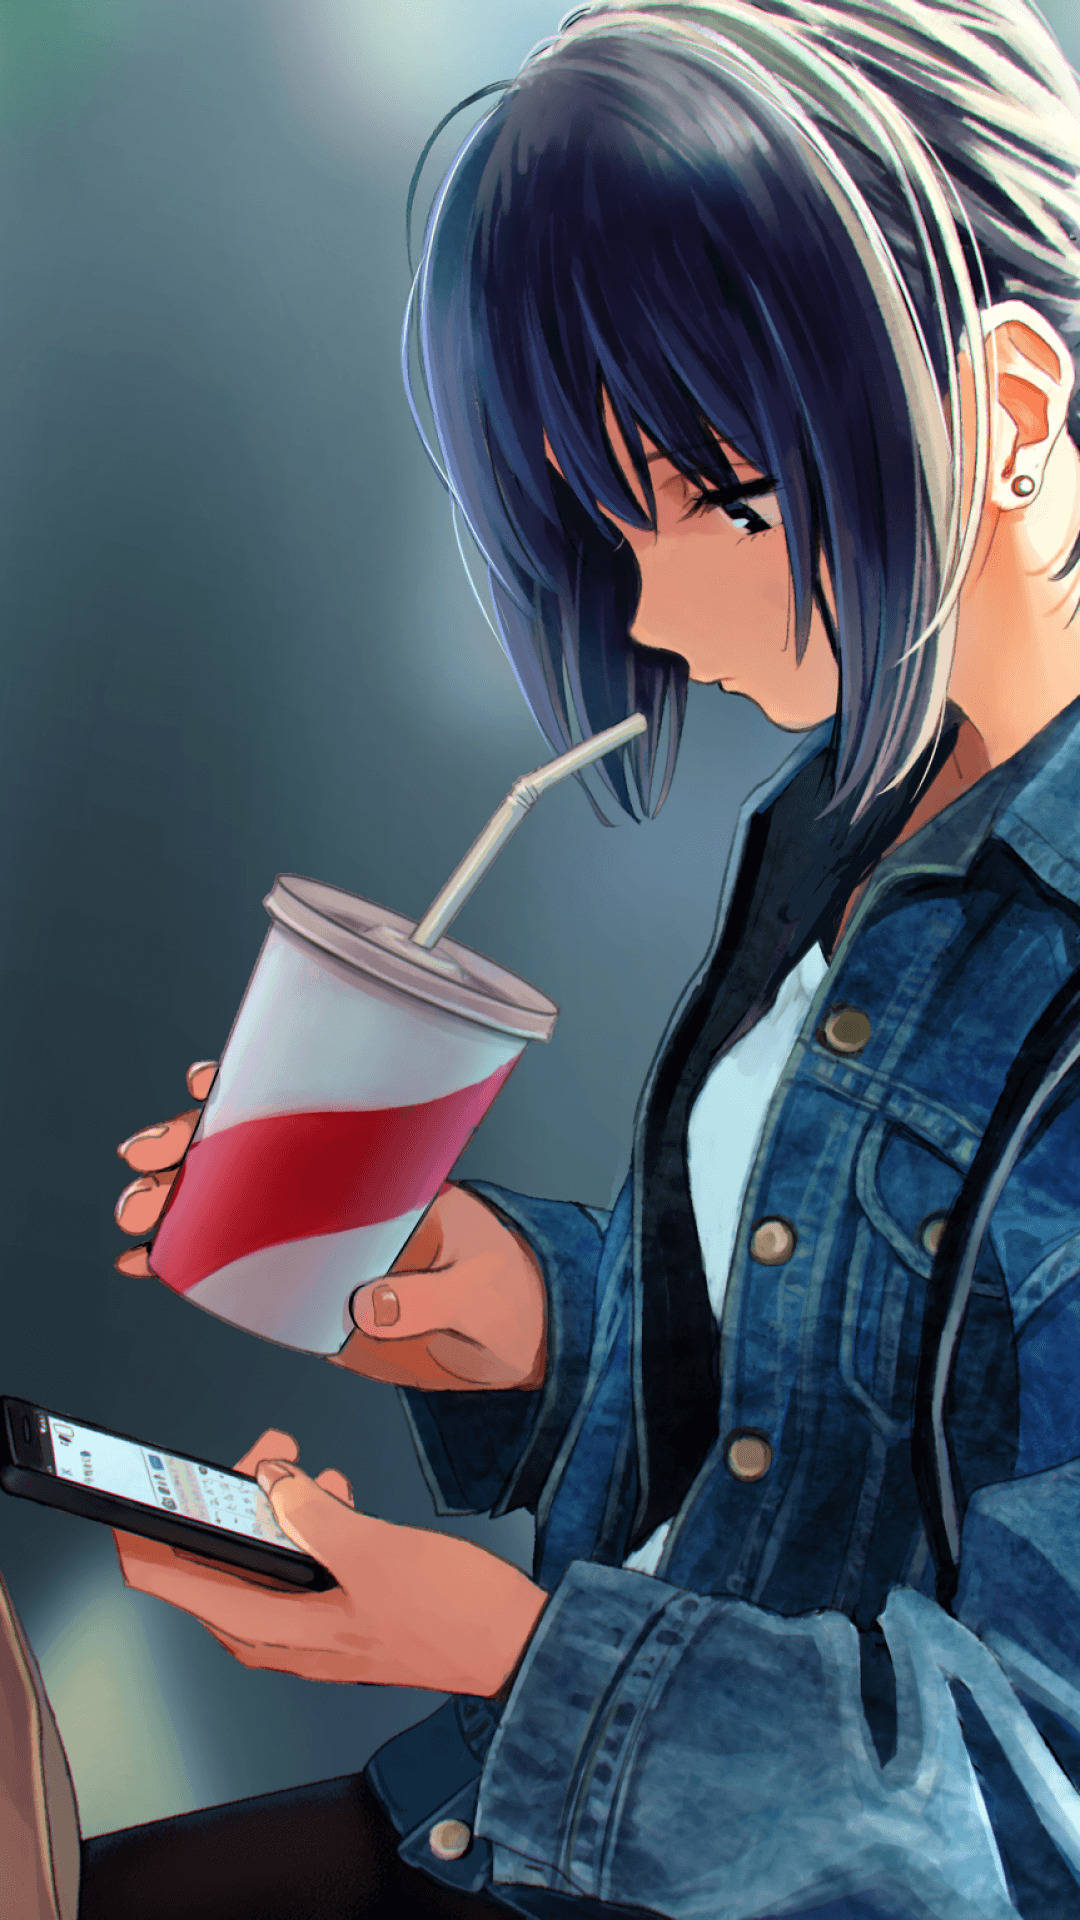 Download Sipping Cute Anime Girl Iphone Wallpaper 